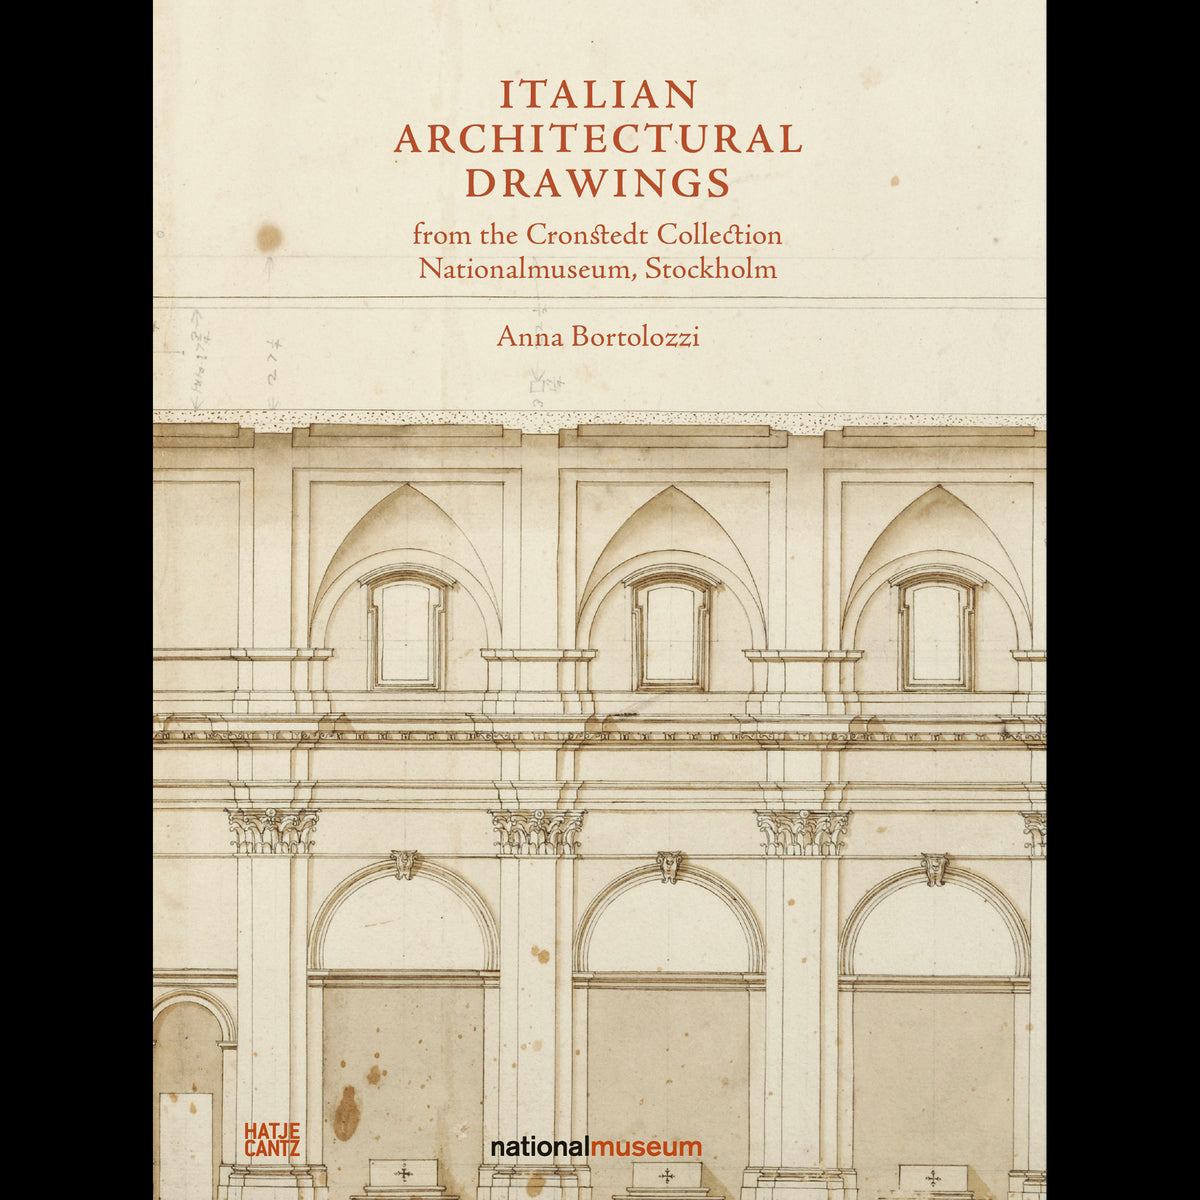 Coverbild Italian Architectural Drawings from the Cronstedt Collection in the Nationalmuseum, Stockholm